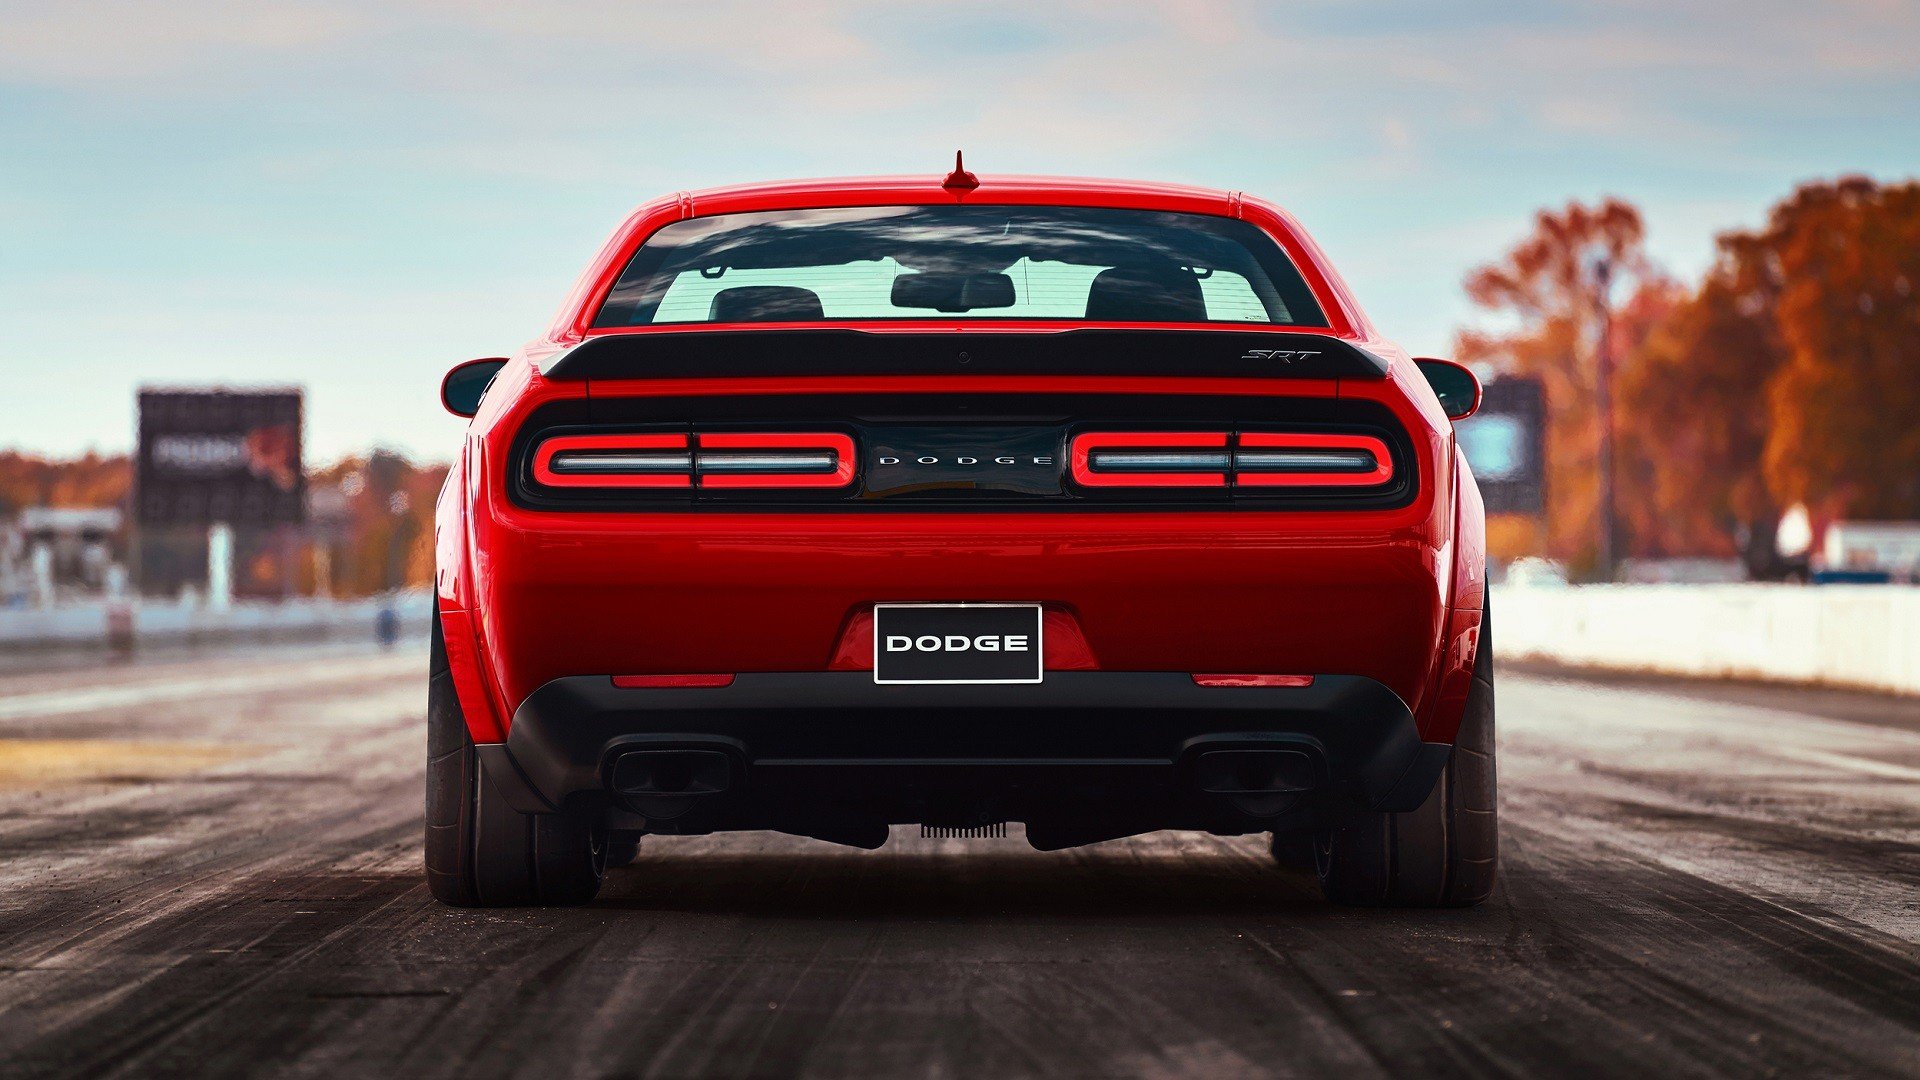 Dodge Challenger, Dodge, Car, Red cars, Red, Rear view Wallpaper